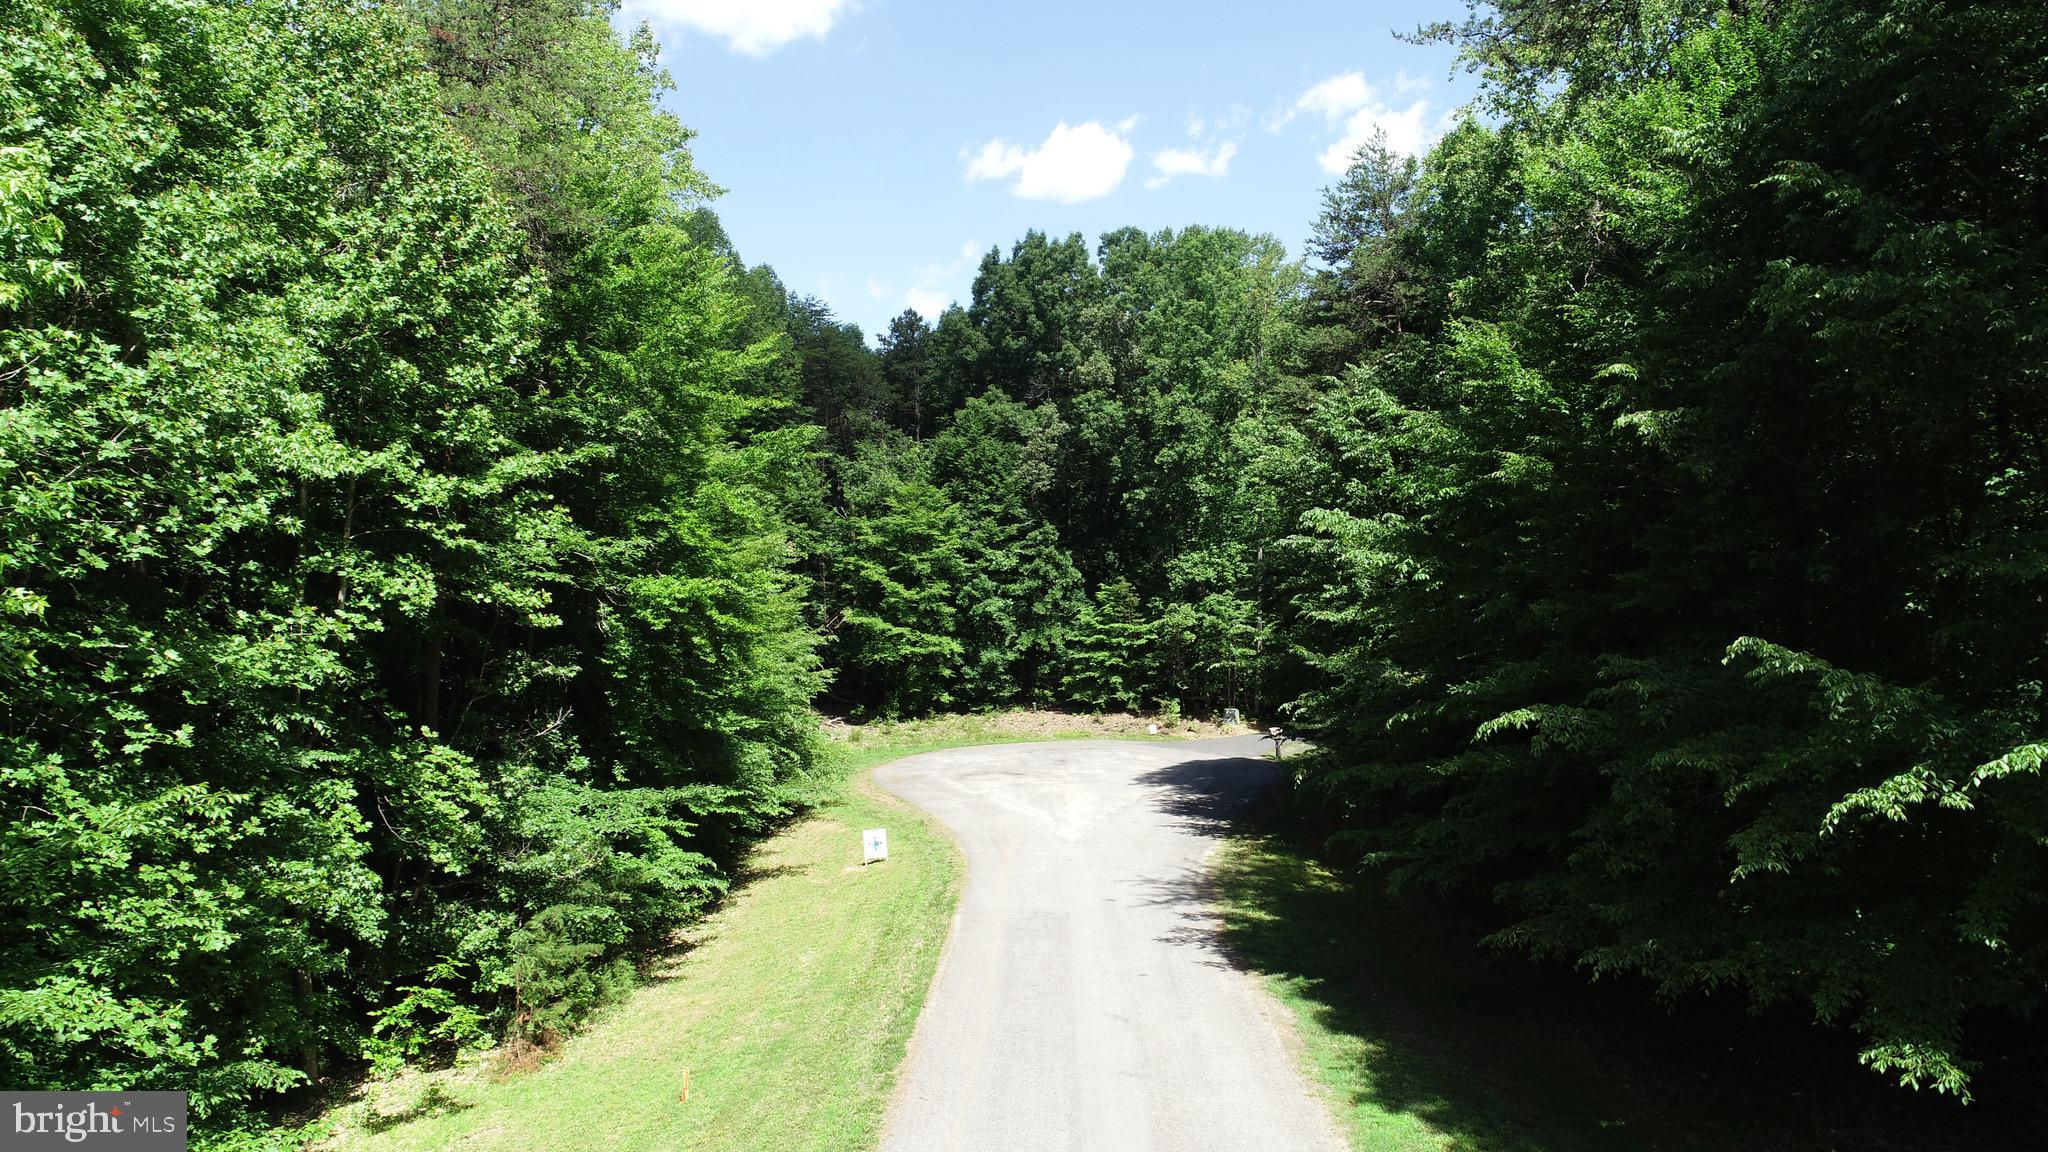 Lot 160 Erin Lane, Mineral, VA 23117 is now new to the market!